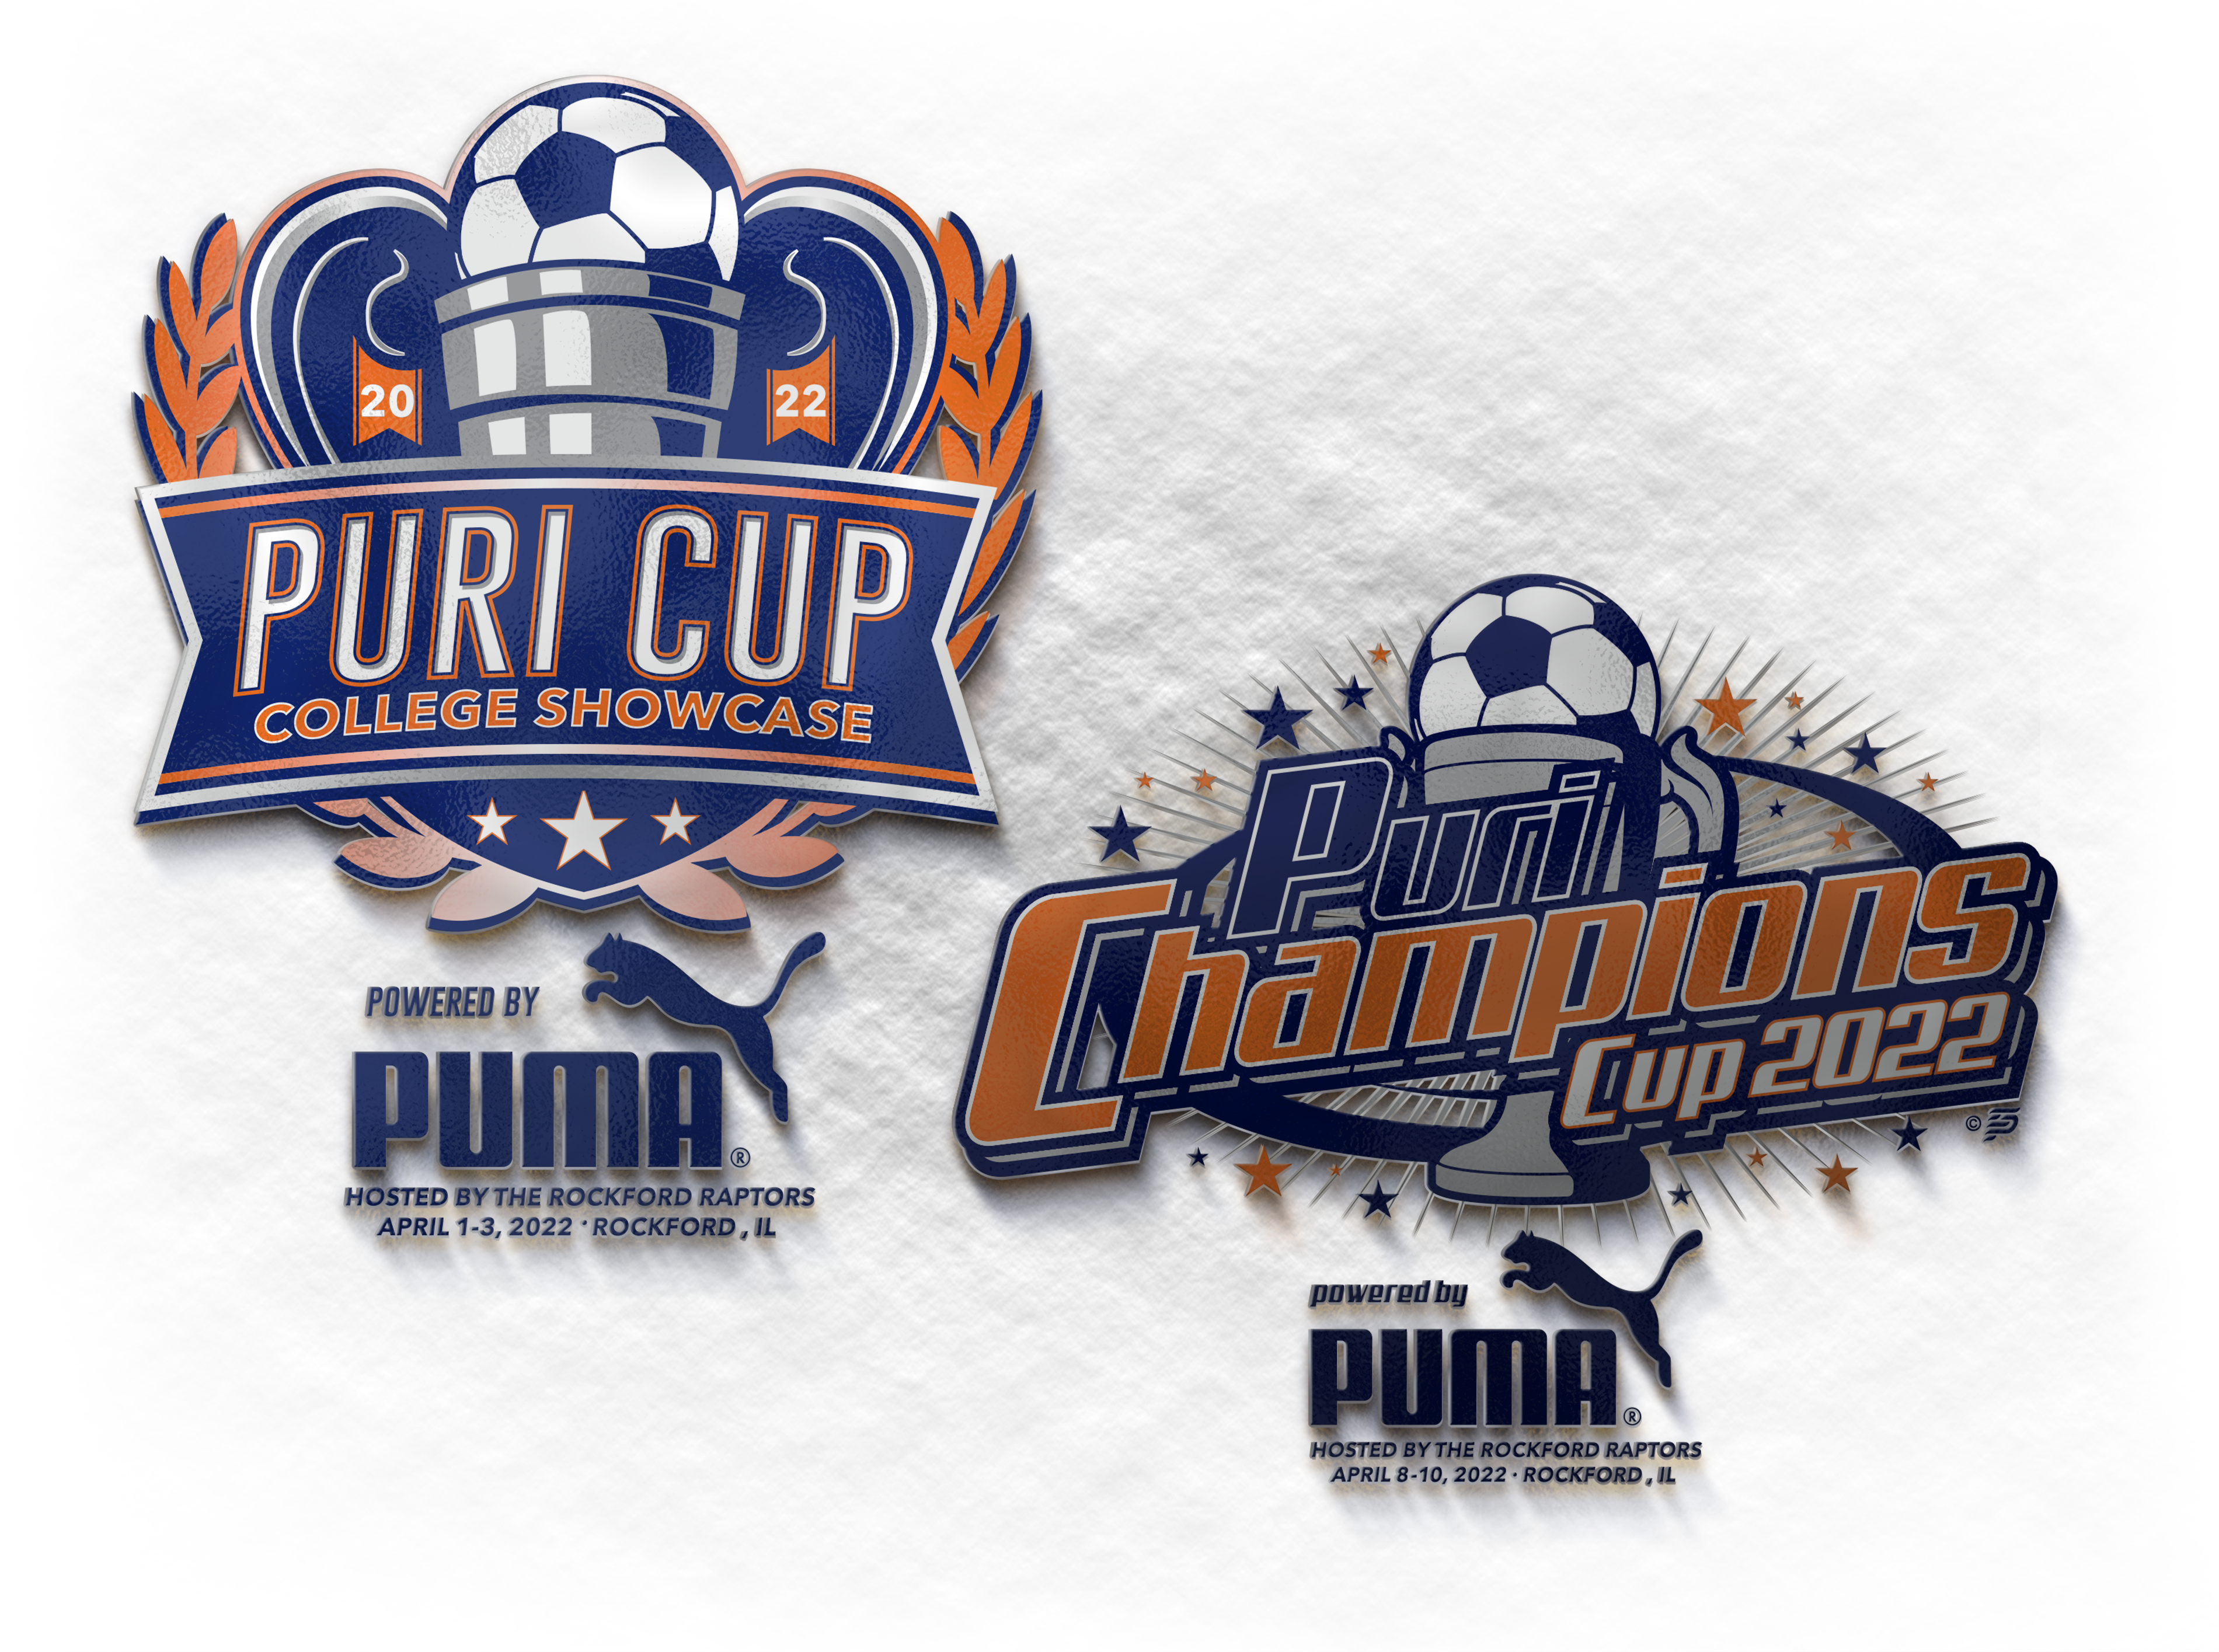 2022 Puri Cup College Showcase & Puri Champions Cup powered by Puma